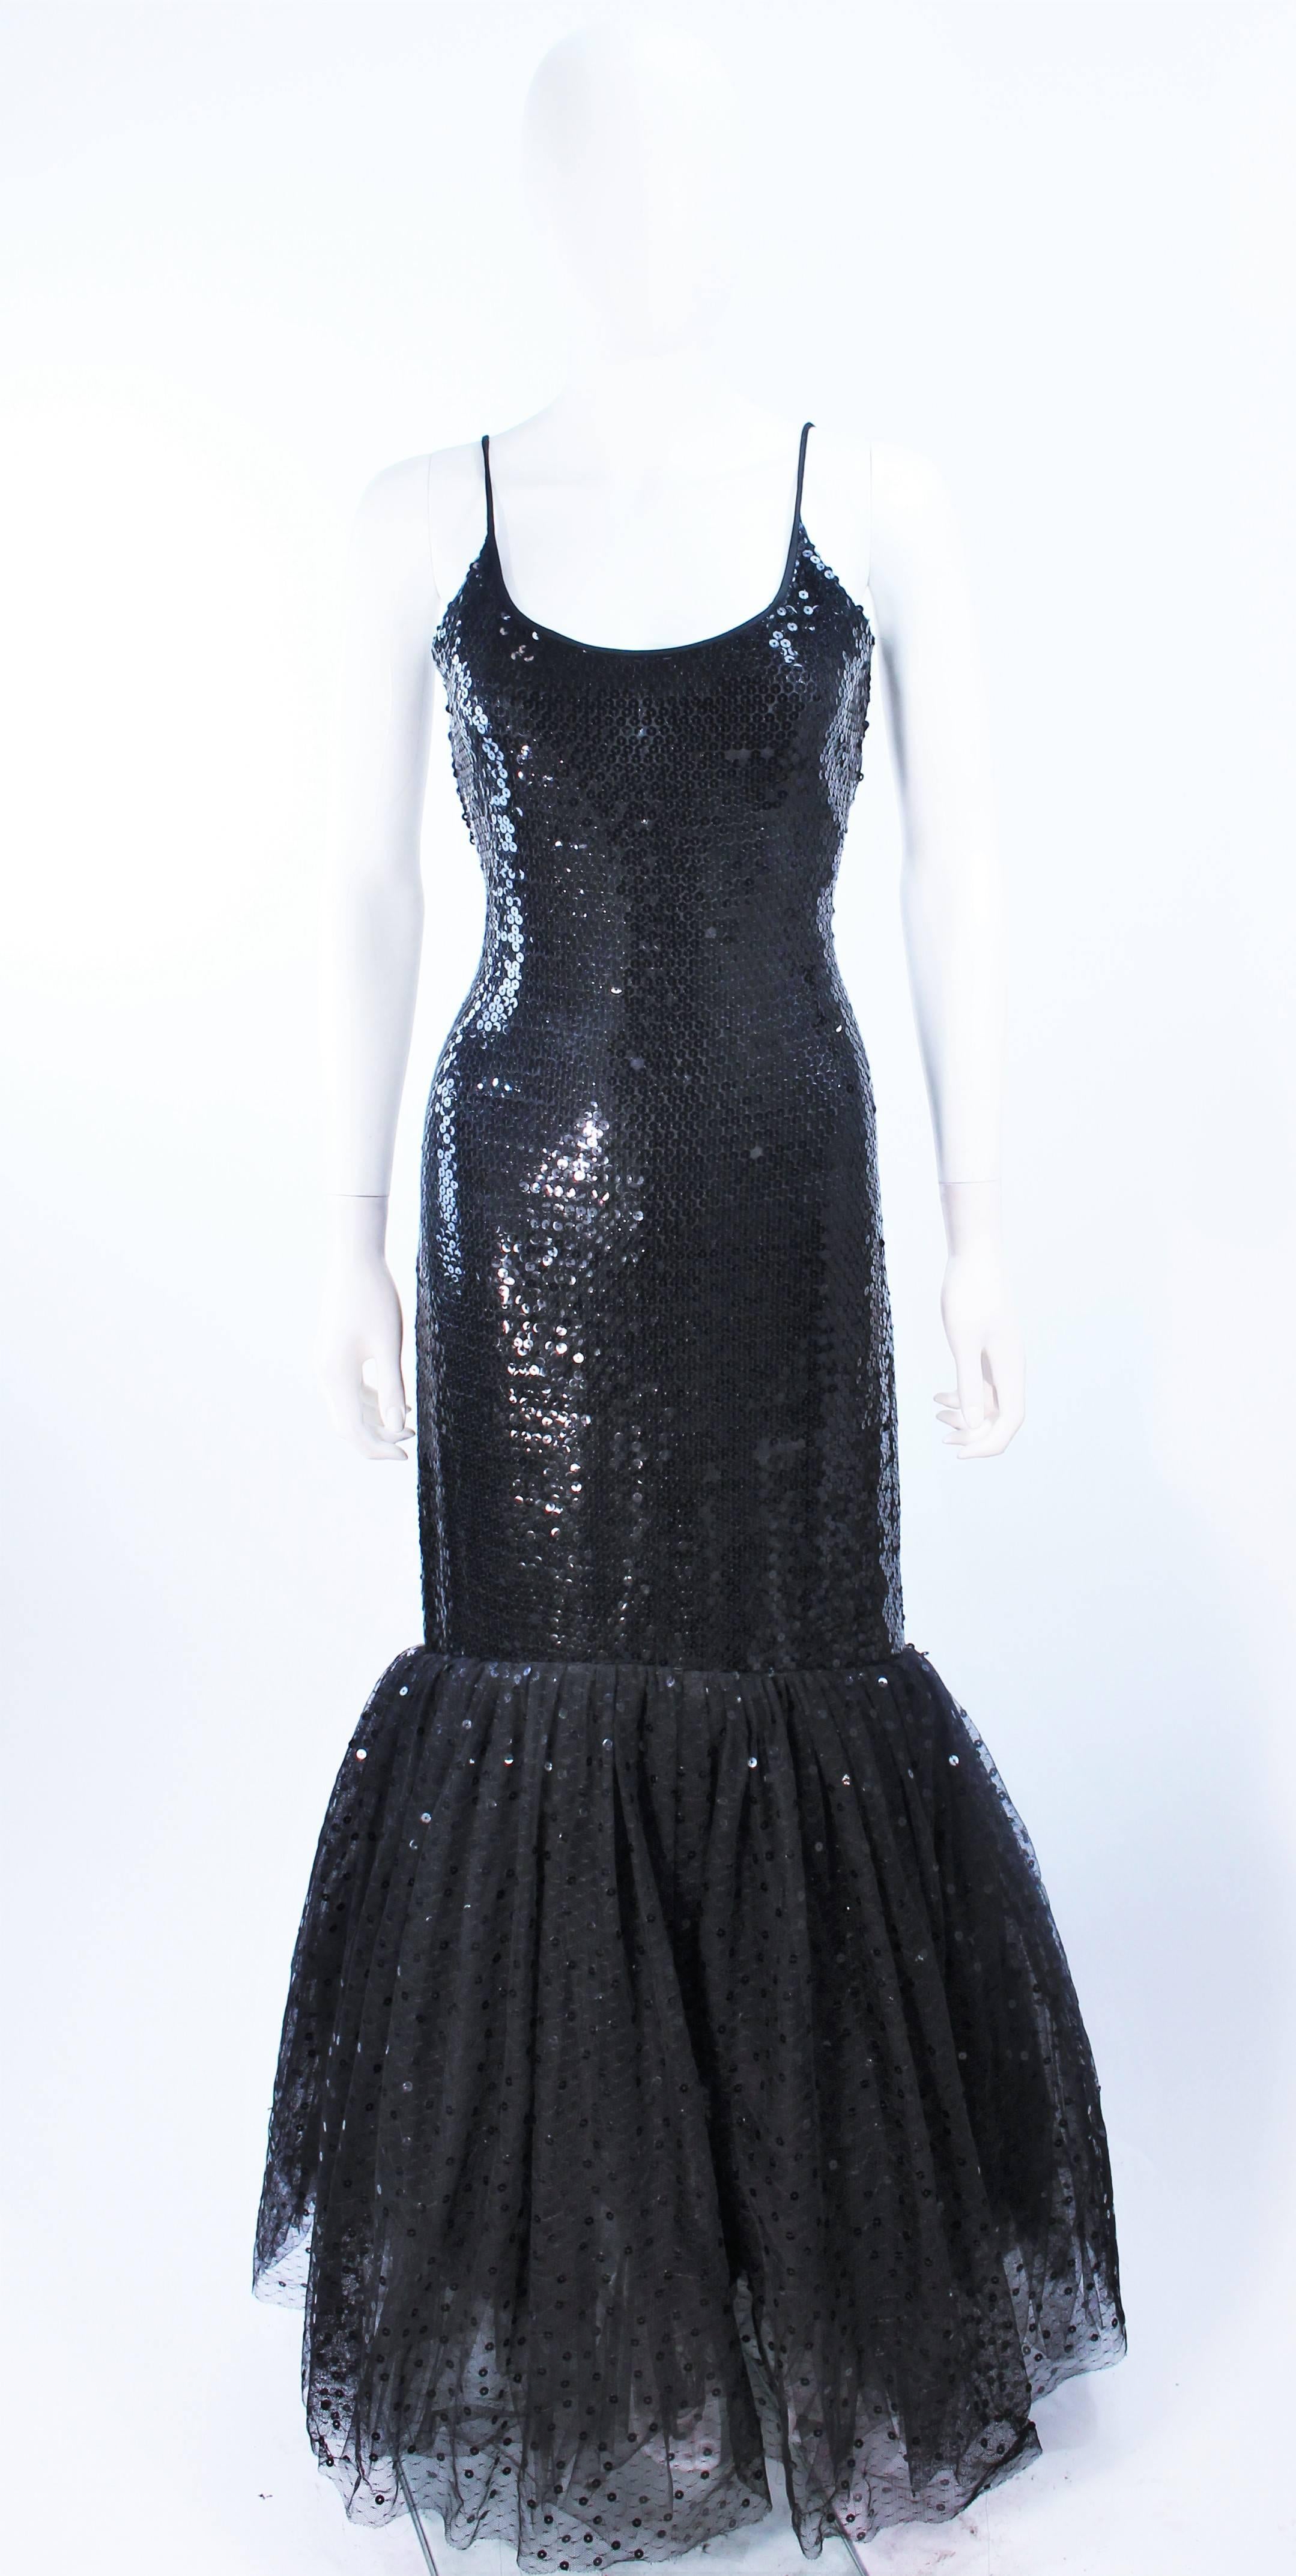 This Jill Richards gown is composed of a black sequin embellished fabric with tulle flare hem, featuring a sequin applique. There is a center back zipper closure. In excellent vintage condition.

**Please cross-reference measurements for personal